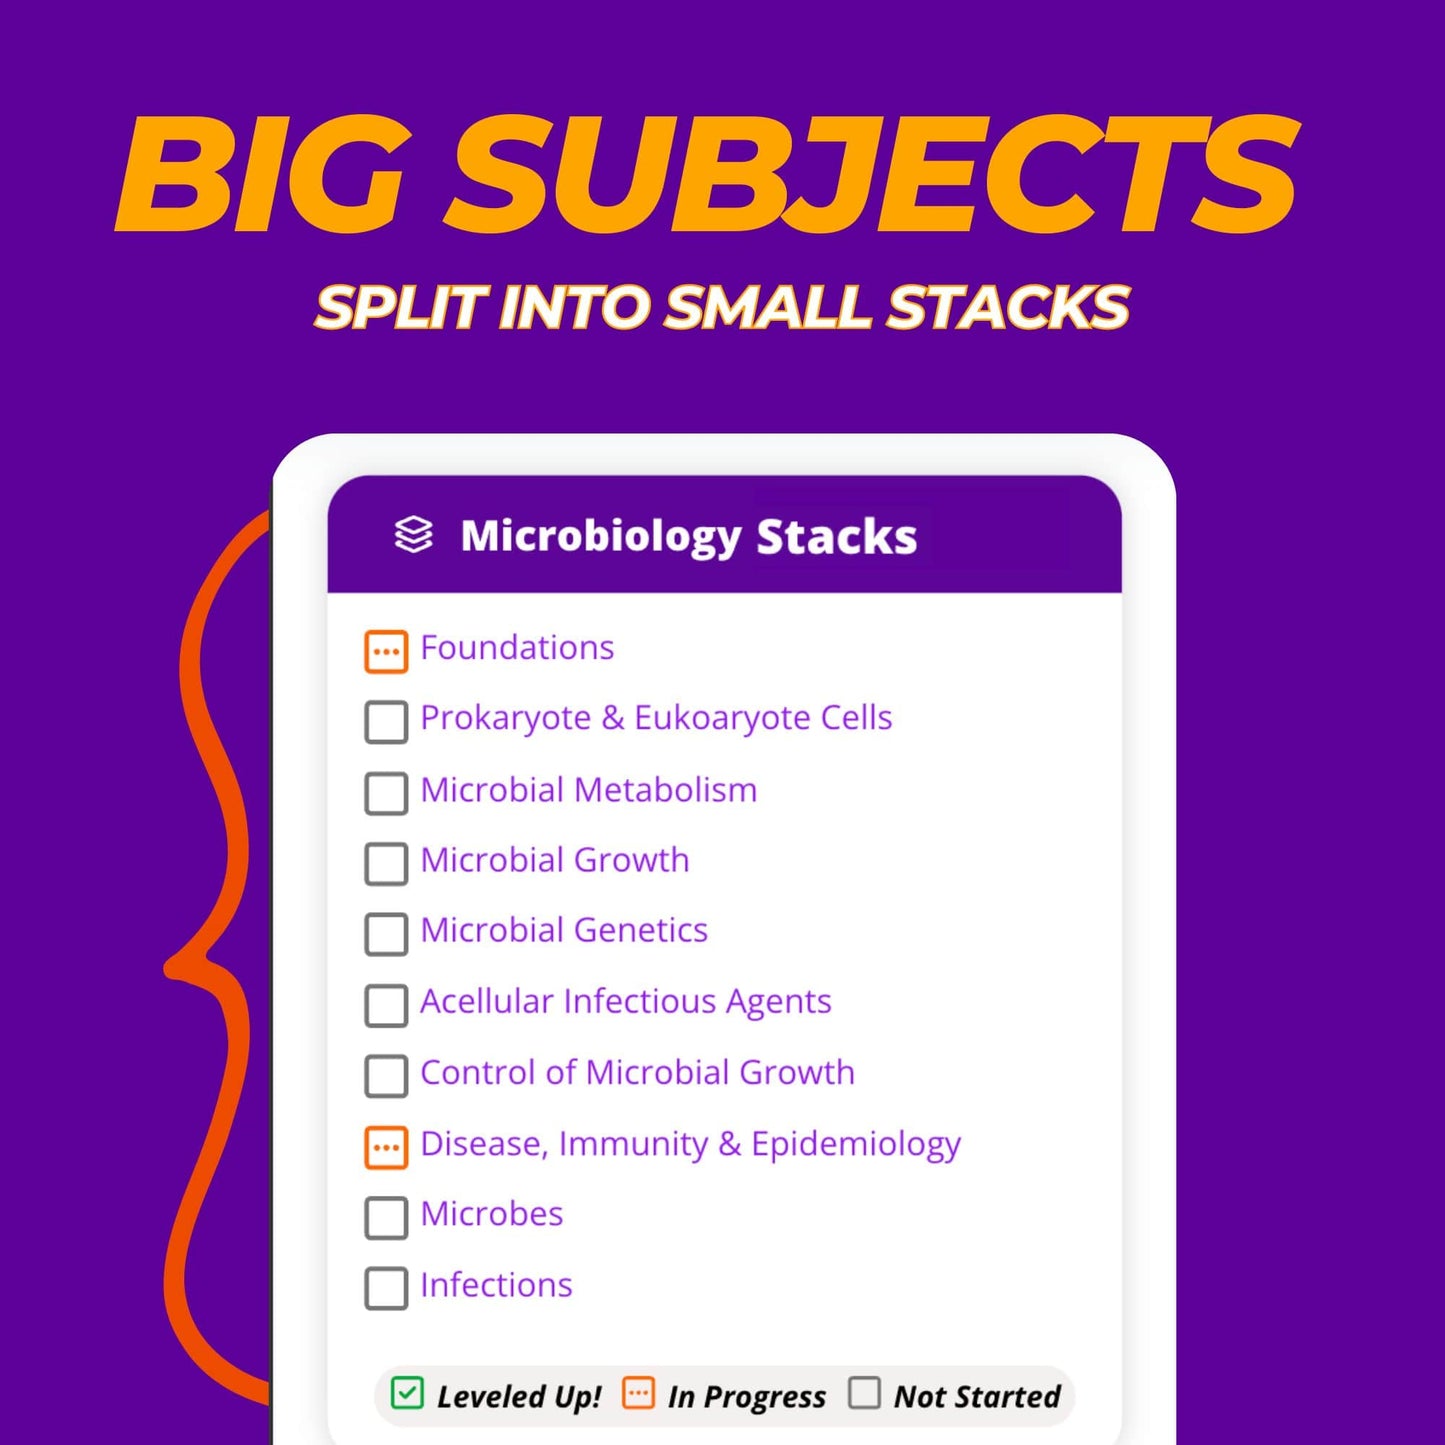 Big Subjects split into small stacks